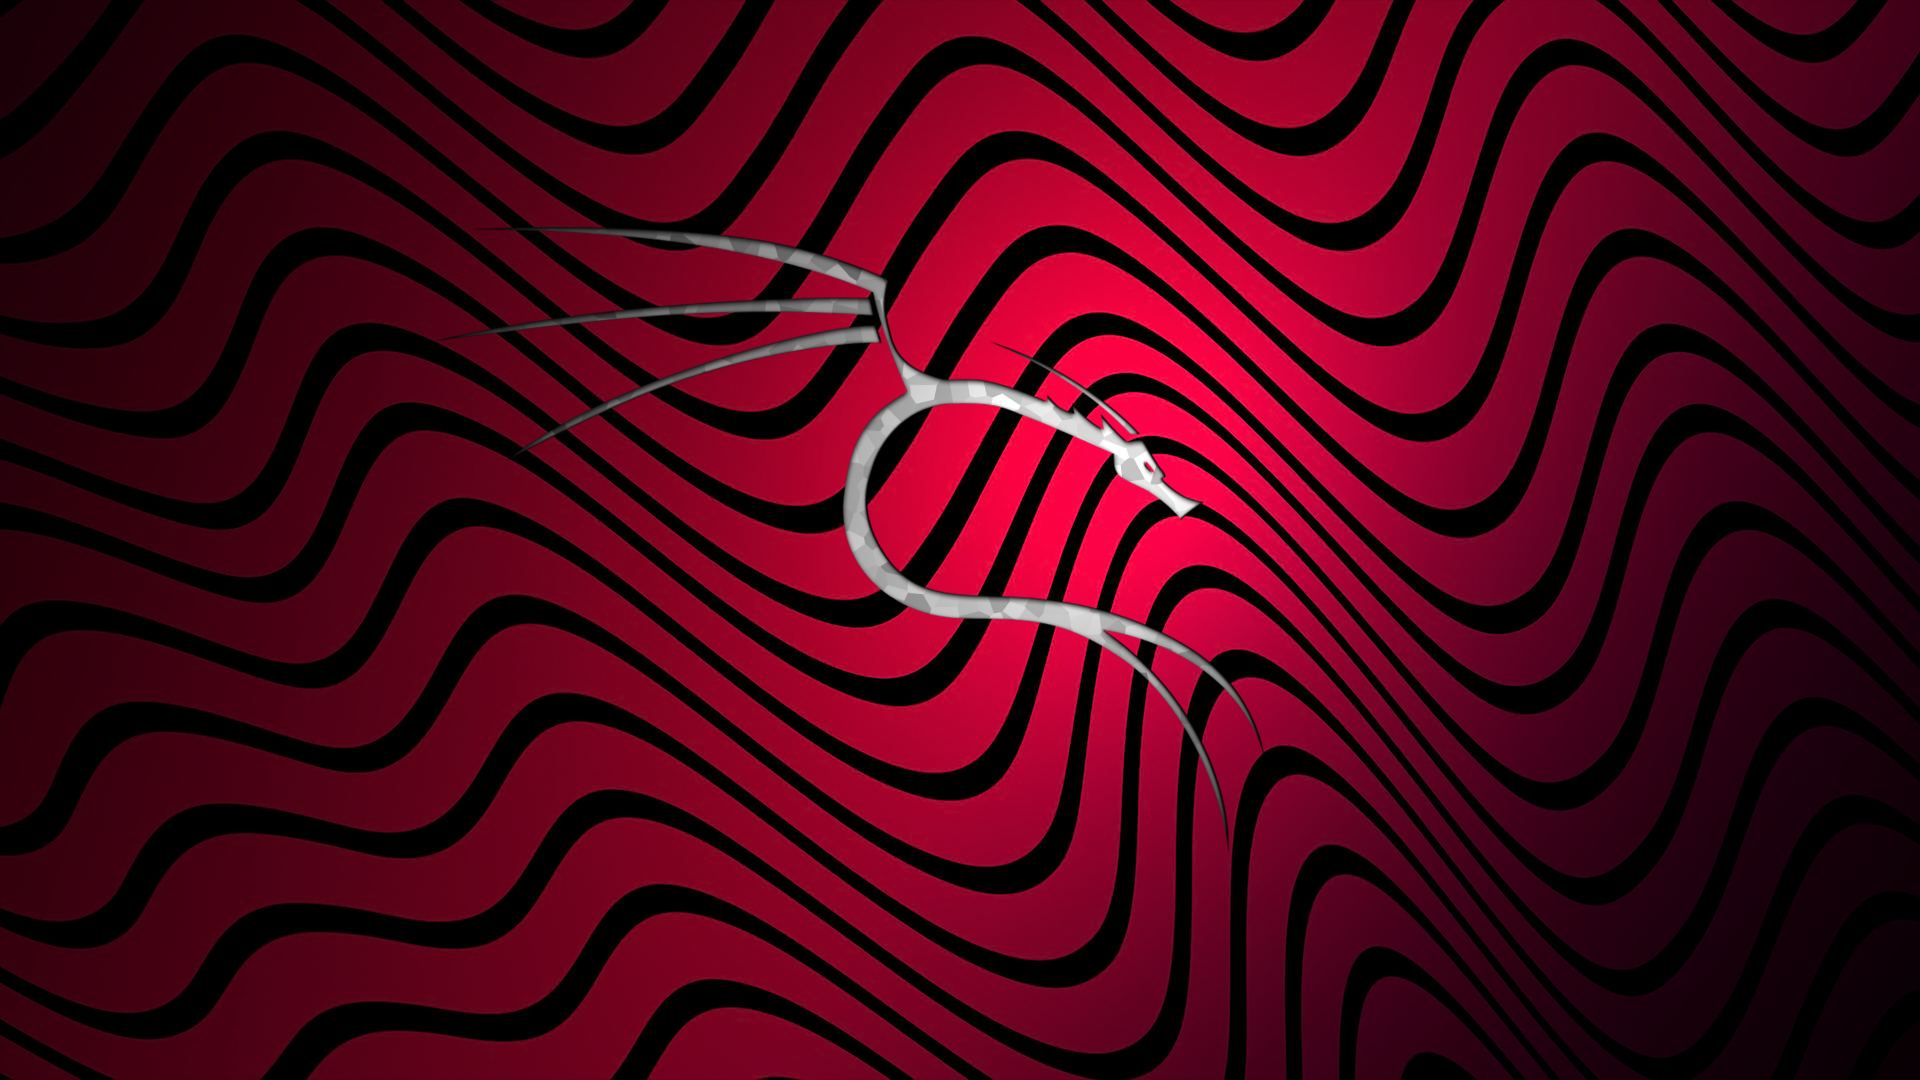 Made A Kali Linux Pewds Edition Wallpaper For All You Hacker Folks